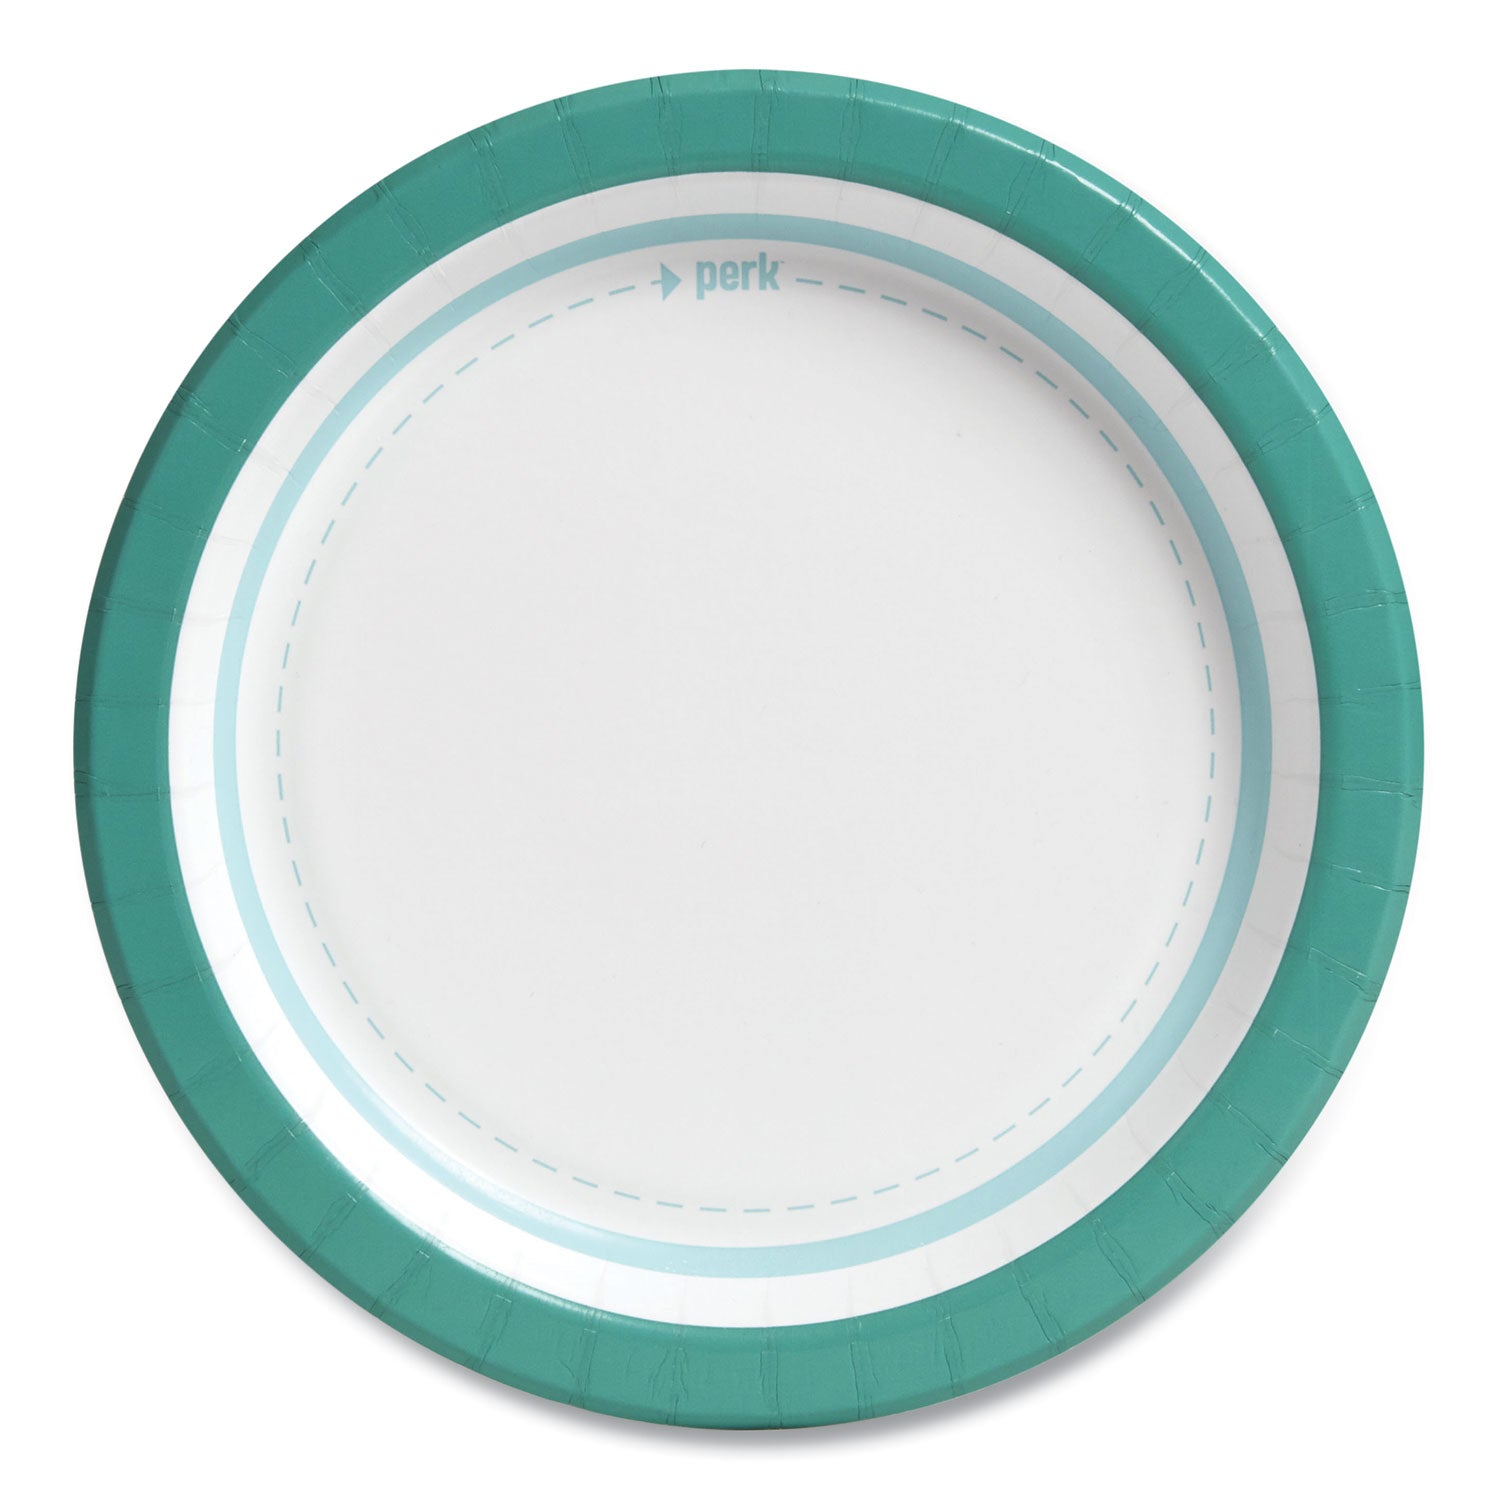 Everyday Paper Plates, 8.5" dia, White/Teal, 125/Pack - 2